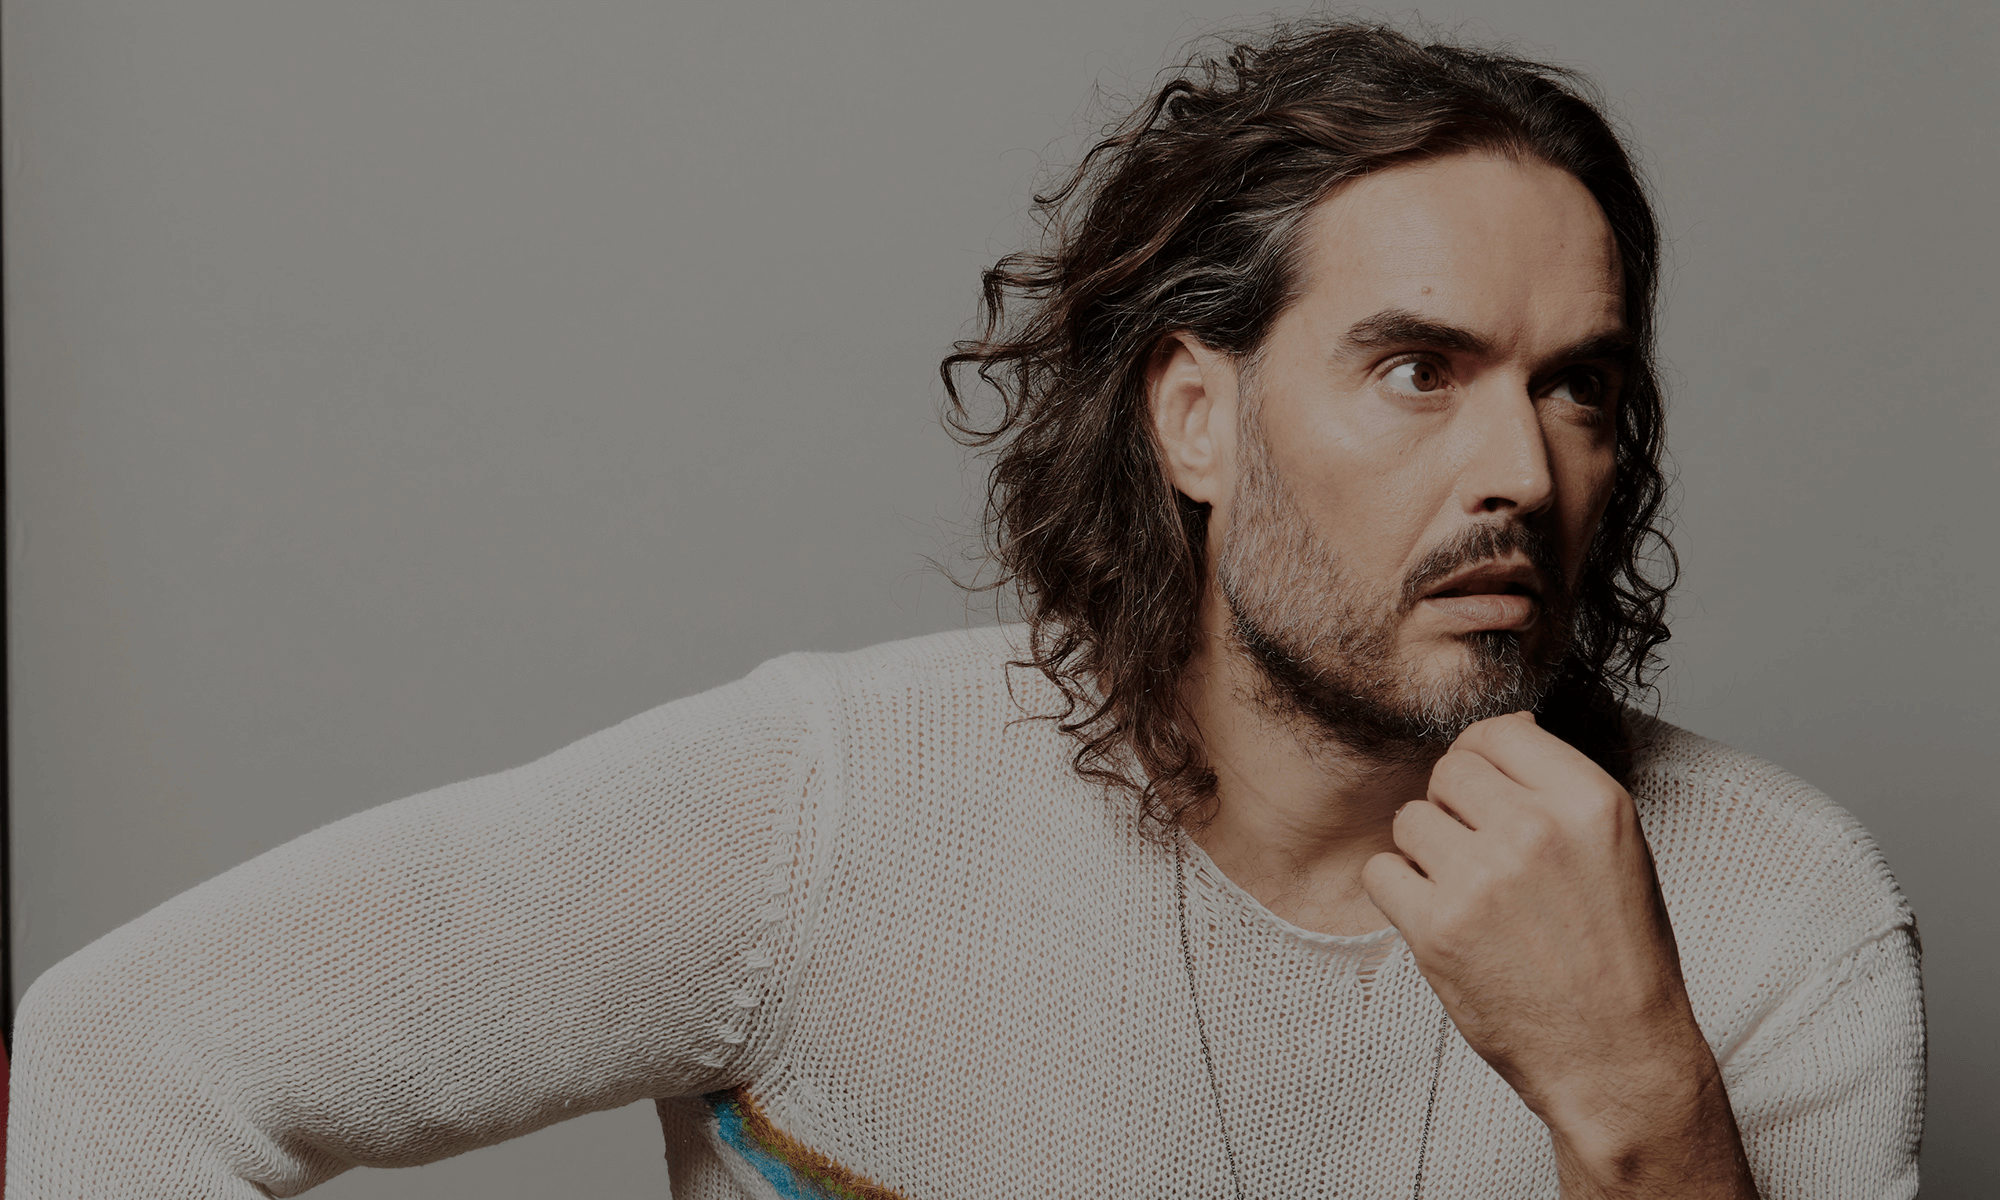 Messing with the Truth: Disinformation in the West Spread by Russell Brand